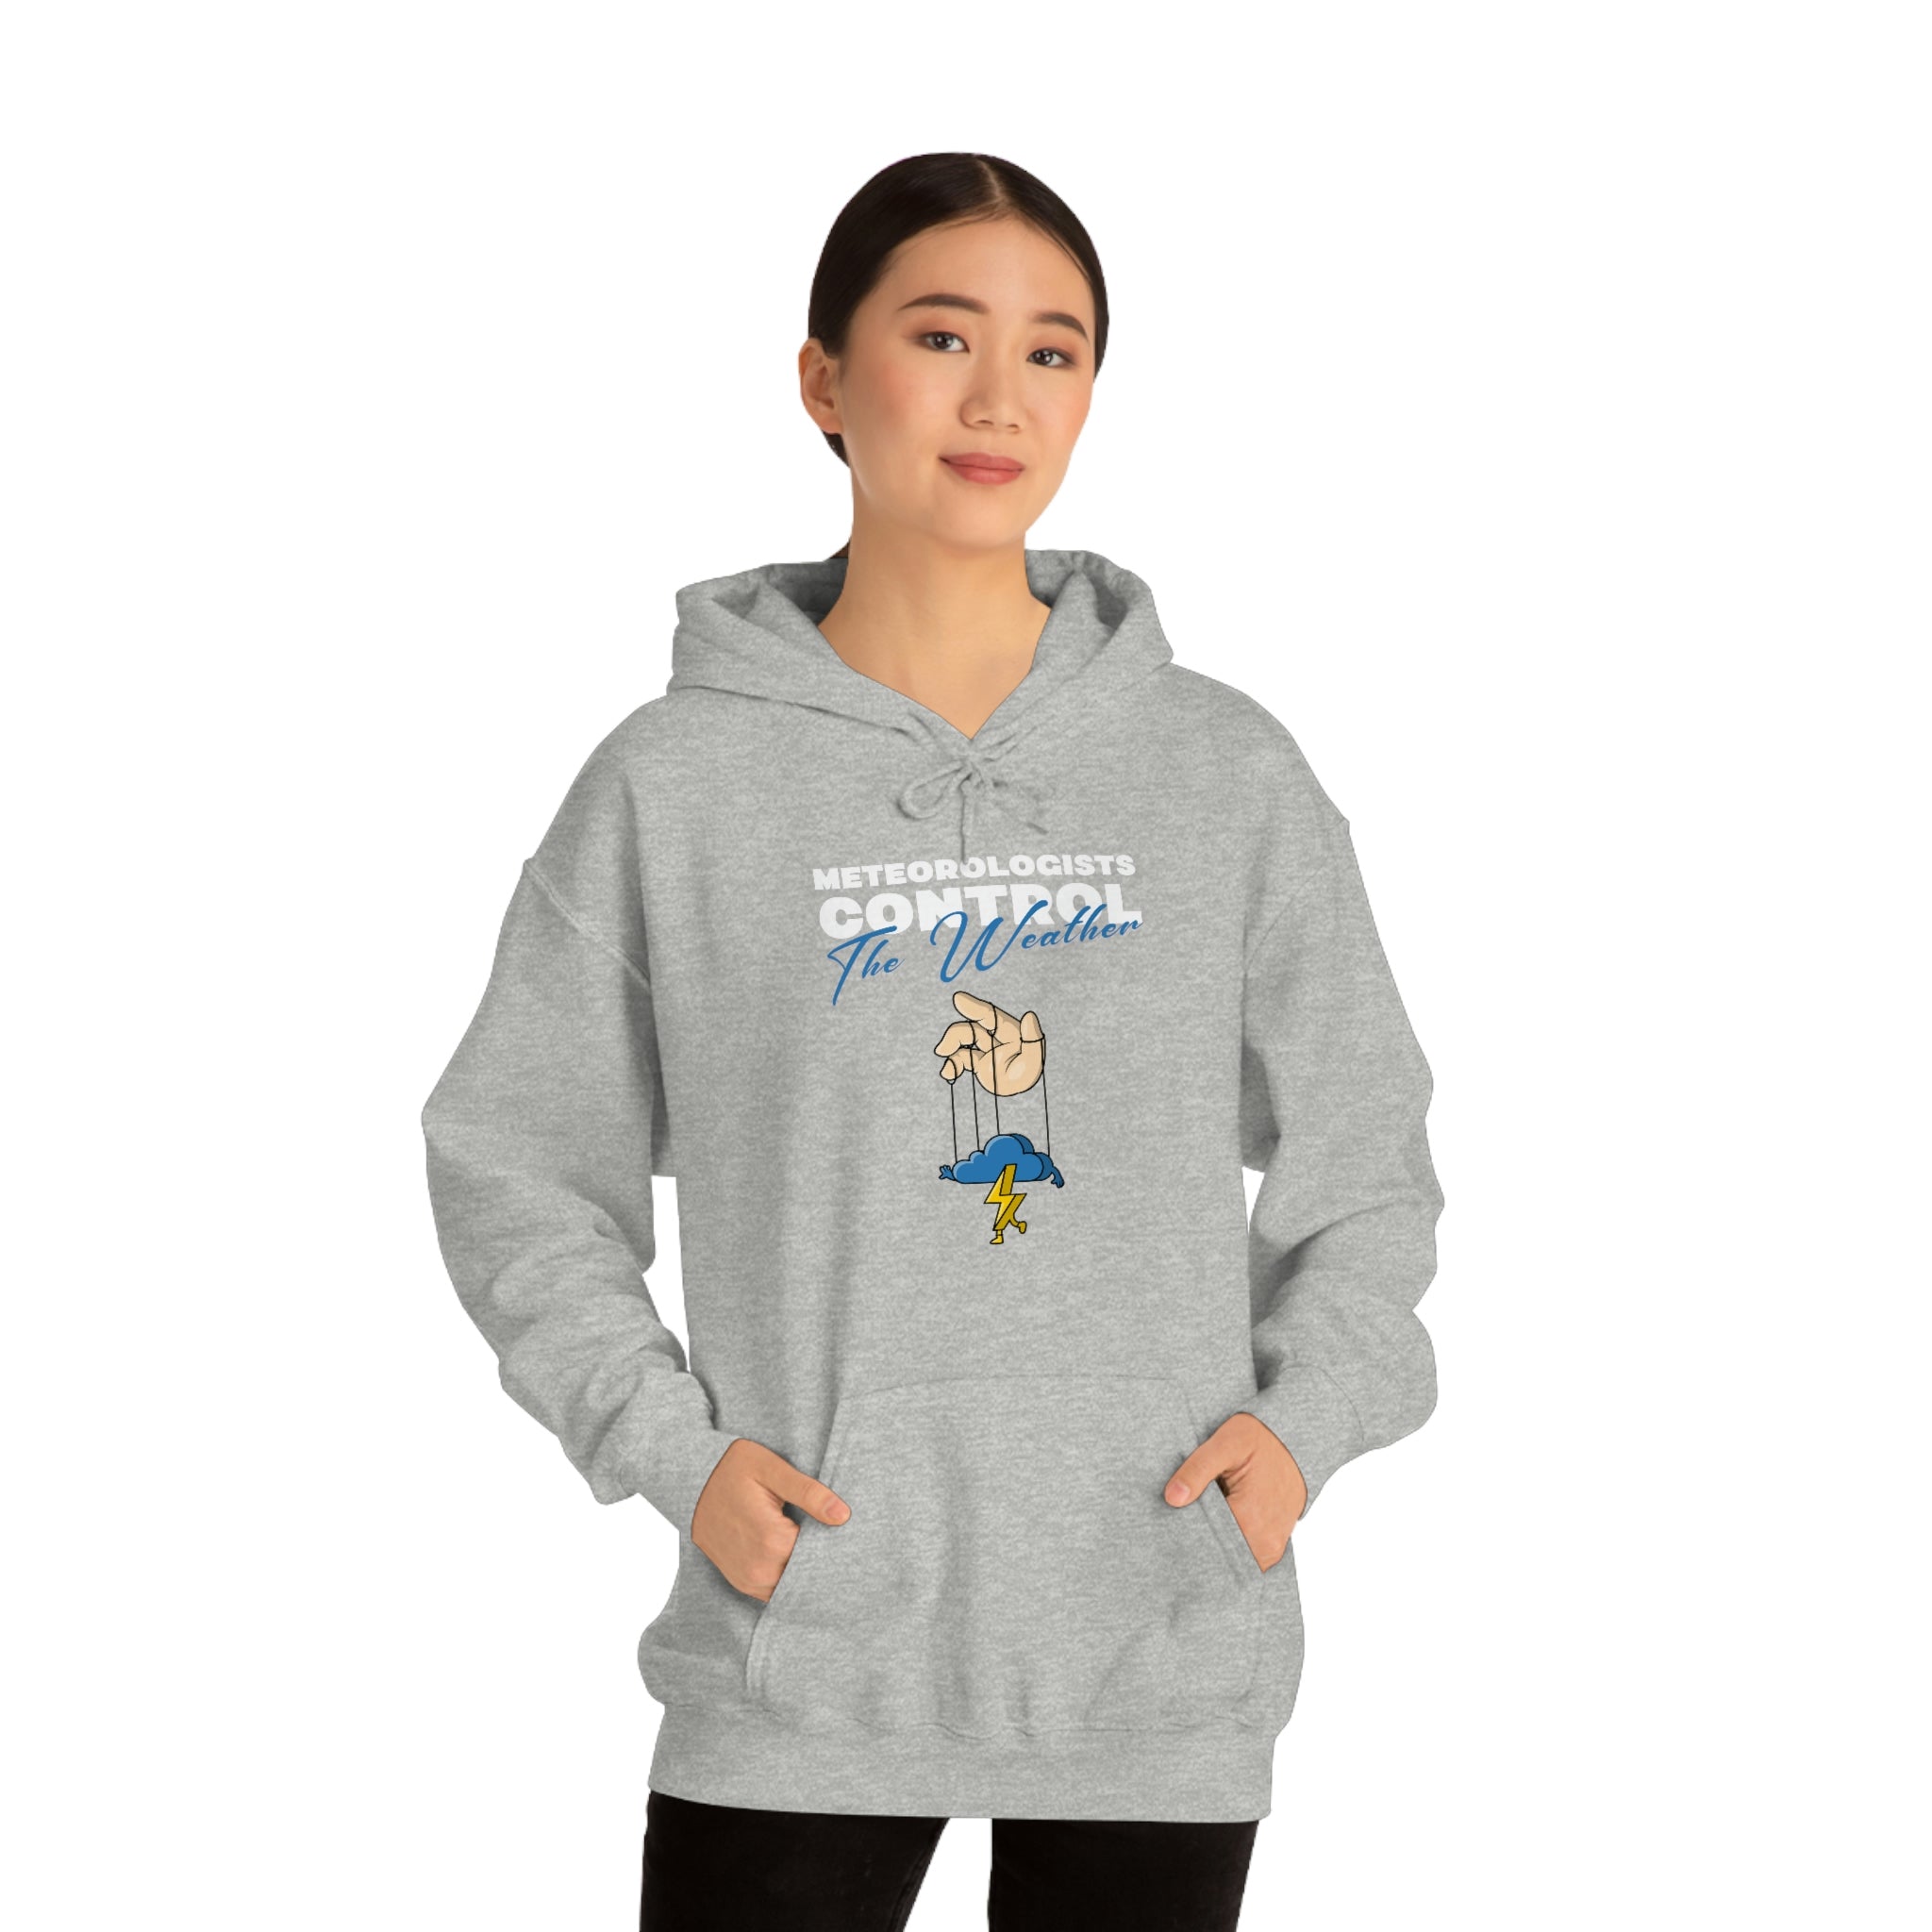 Meteorologists Control The Weather Hoodie 